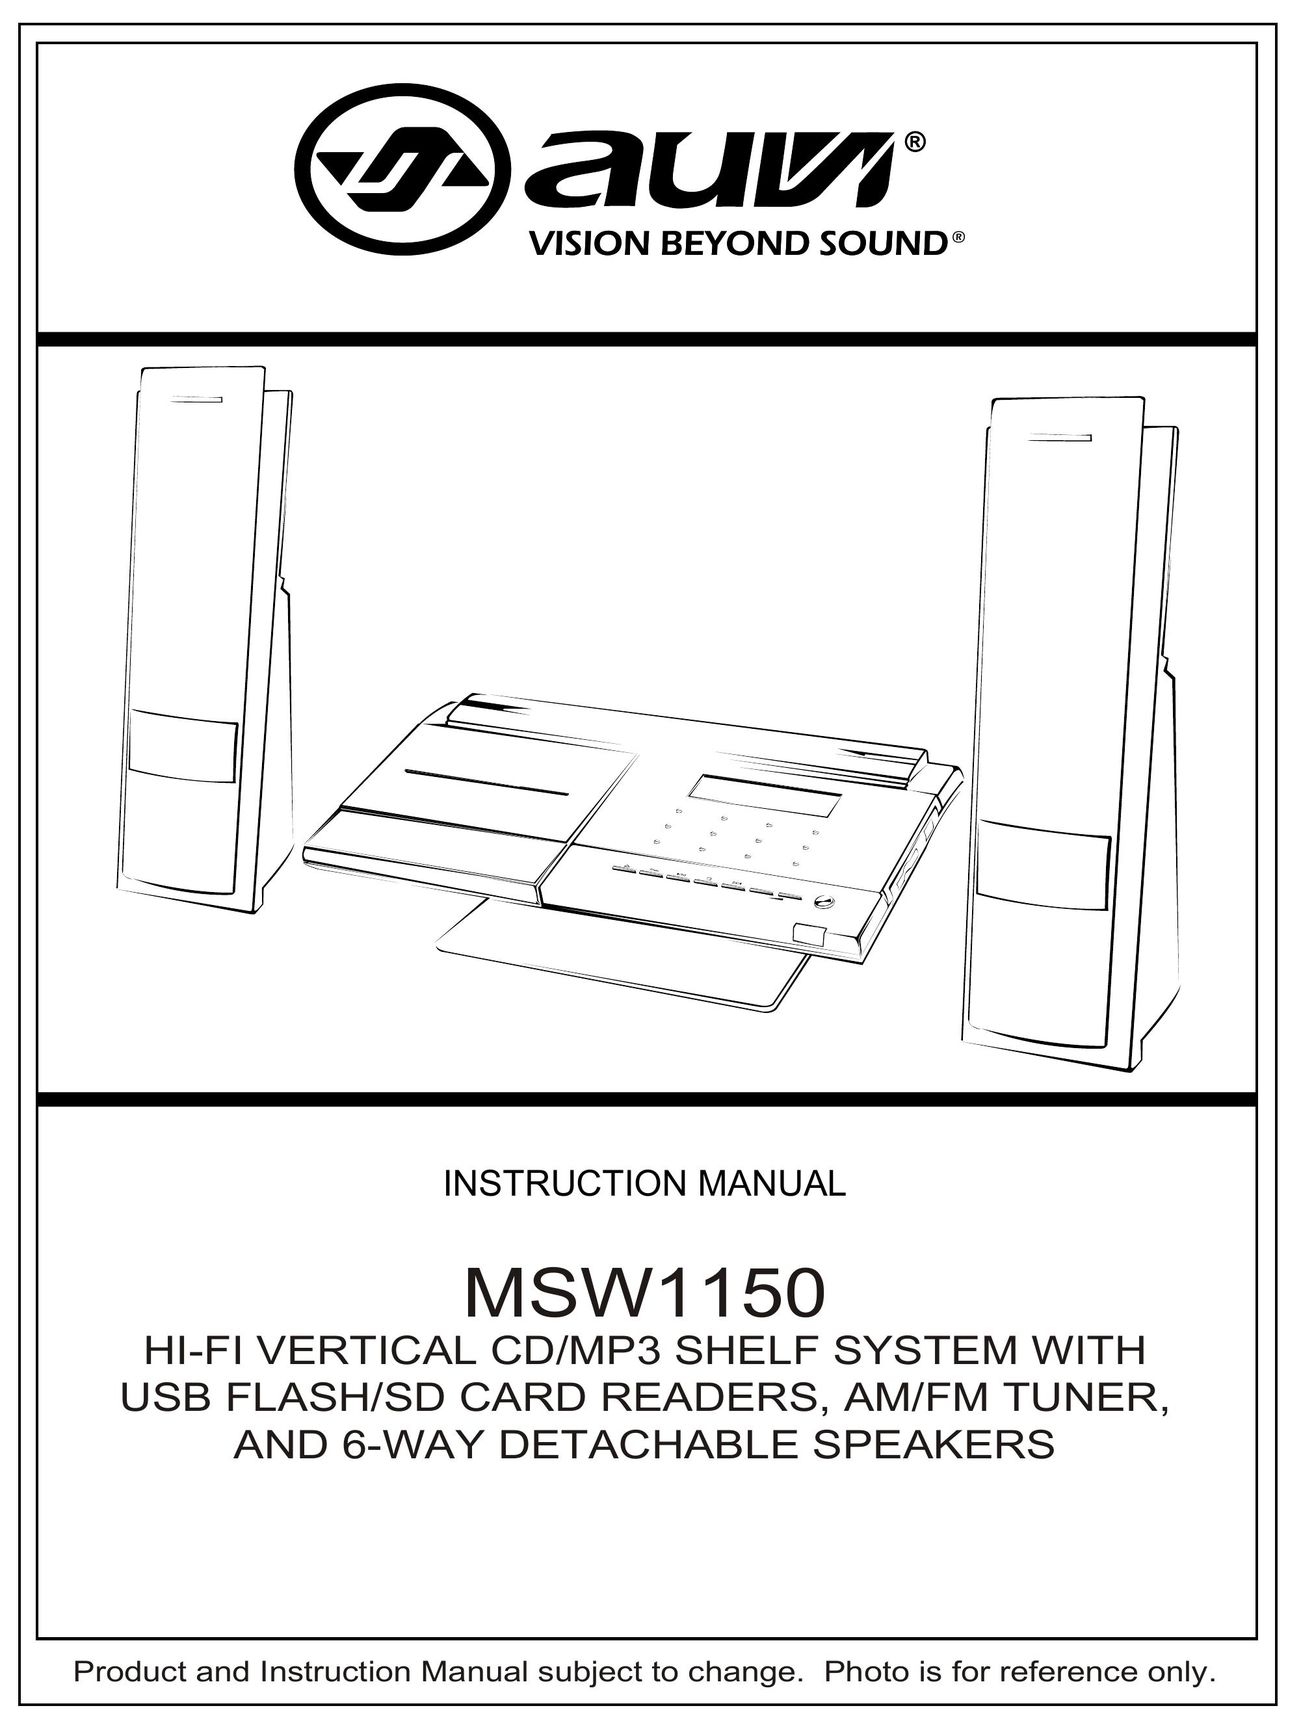 AUVI Technologies MSW1150 Stereo System User Manual